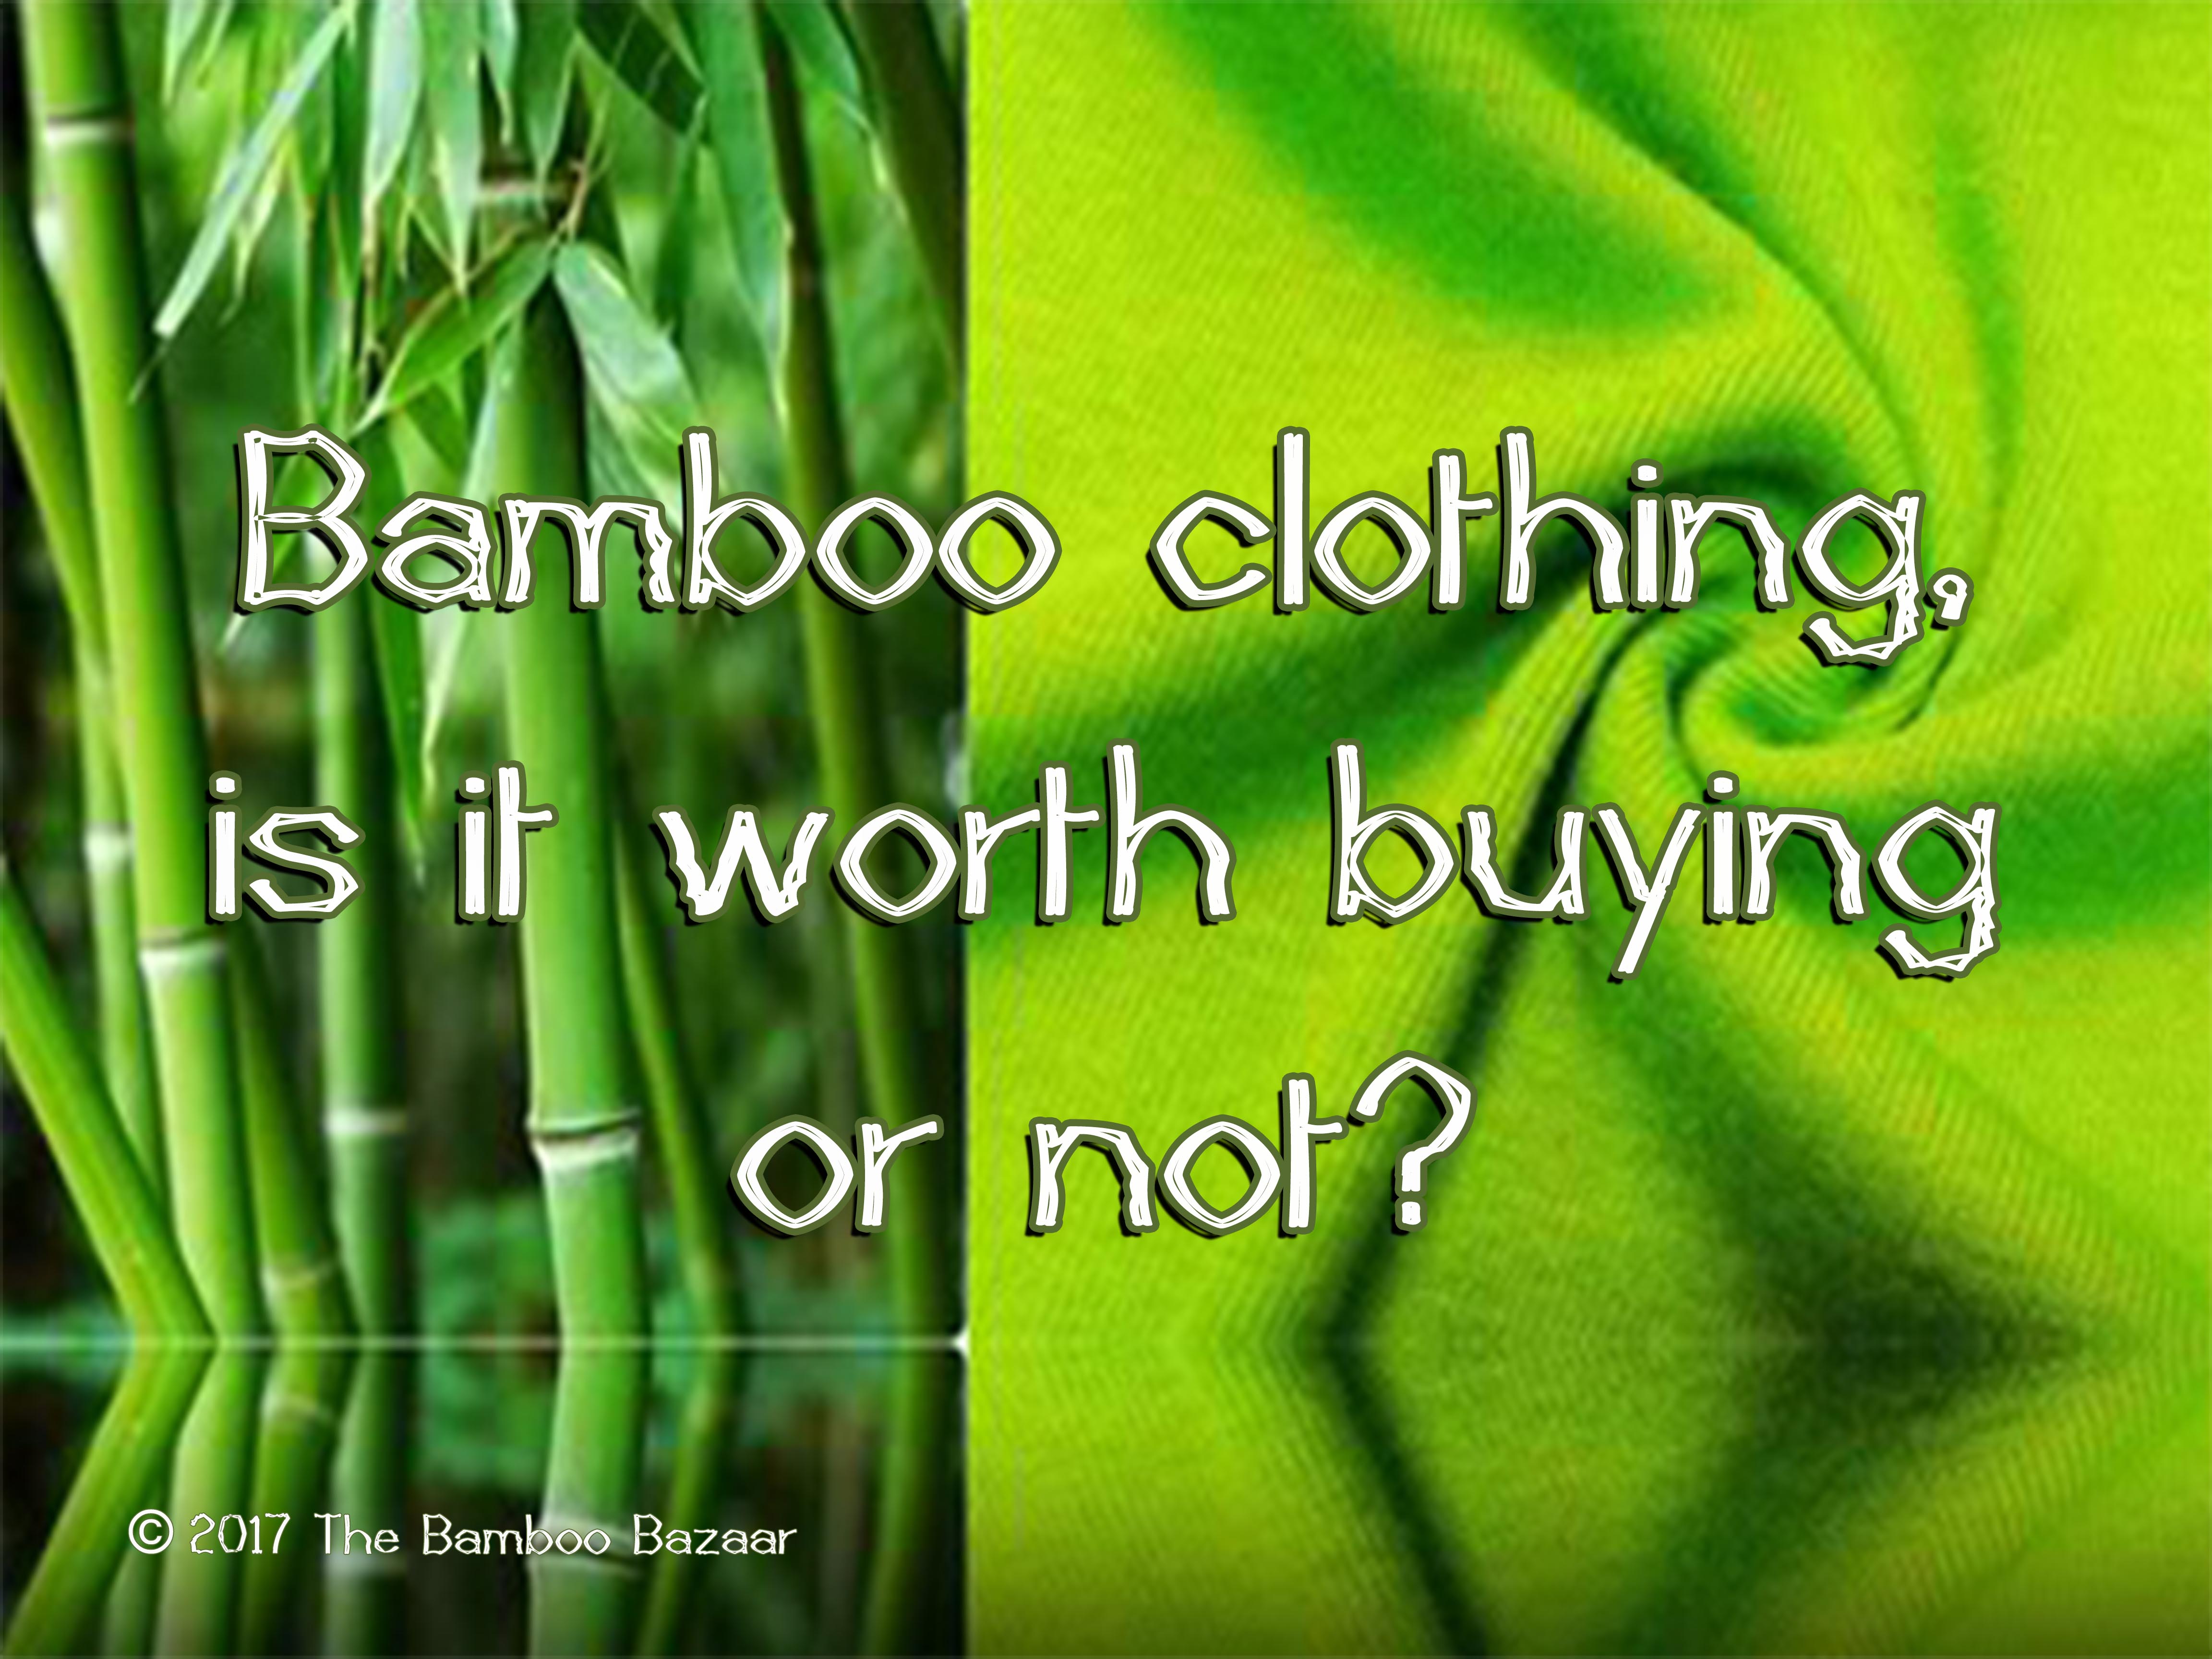 Bamboo clothing, is it worth buying or not?